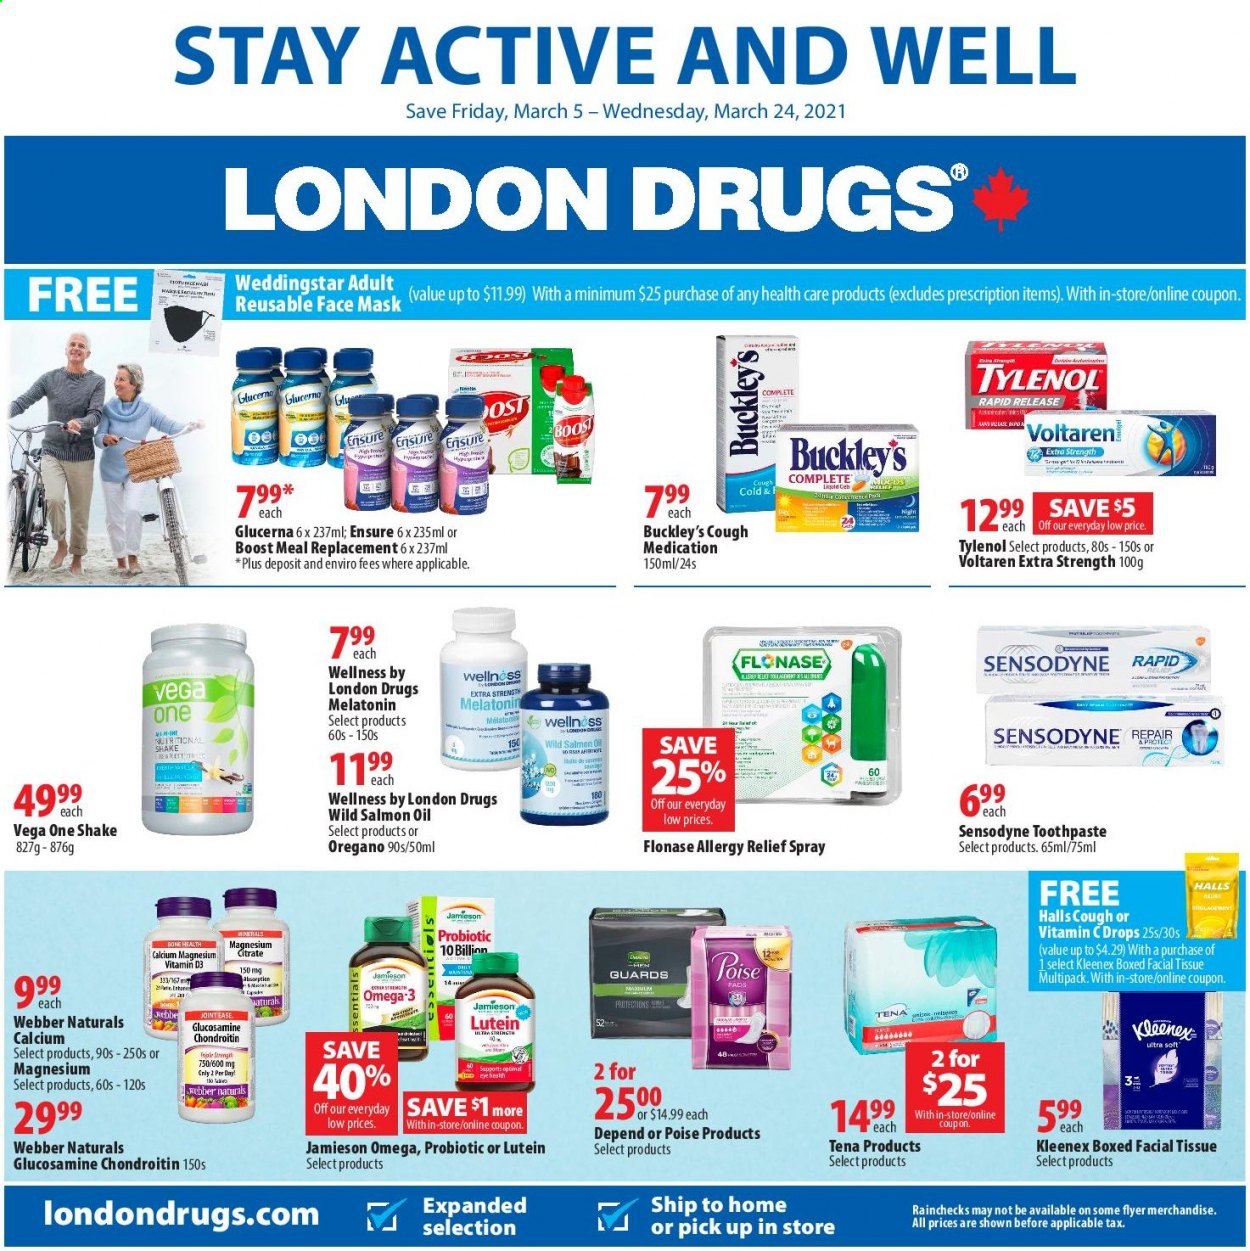 thumbnail - London Drugs Flyer - March 05, 2021 - March 24, 2021 - Sales products - Halls, Boost, Kleenex, tissues, toothpaste, face mask, glucosamine, magnesium, Melatonin, Tylenol, Omega-3, Glucerna, vitamin D3, allergy relief, Sensodyne. Page 1.